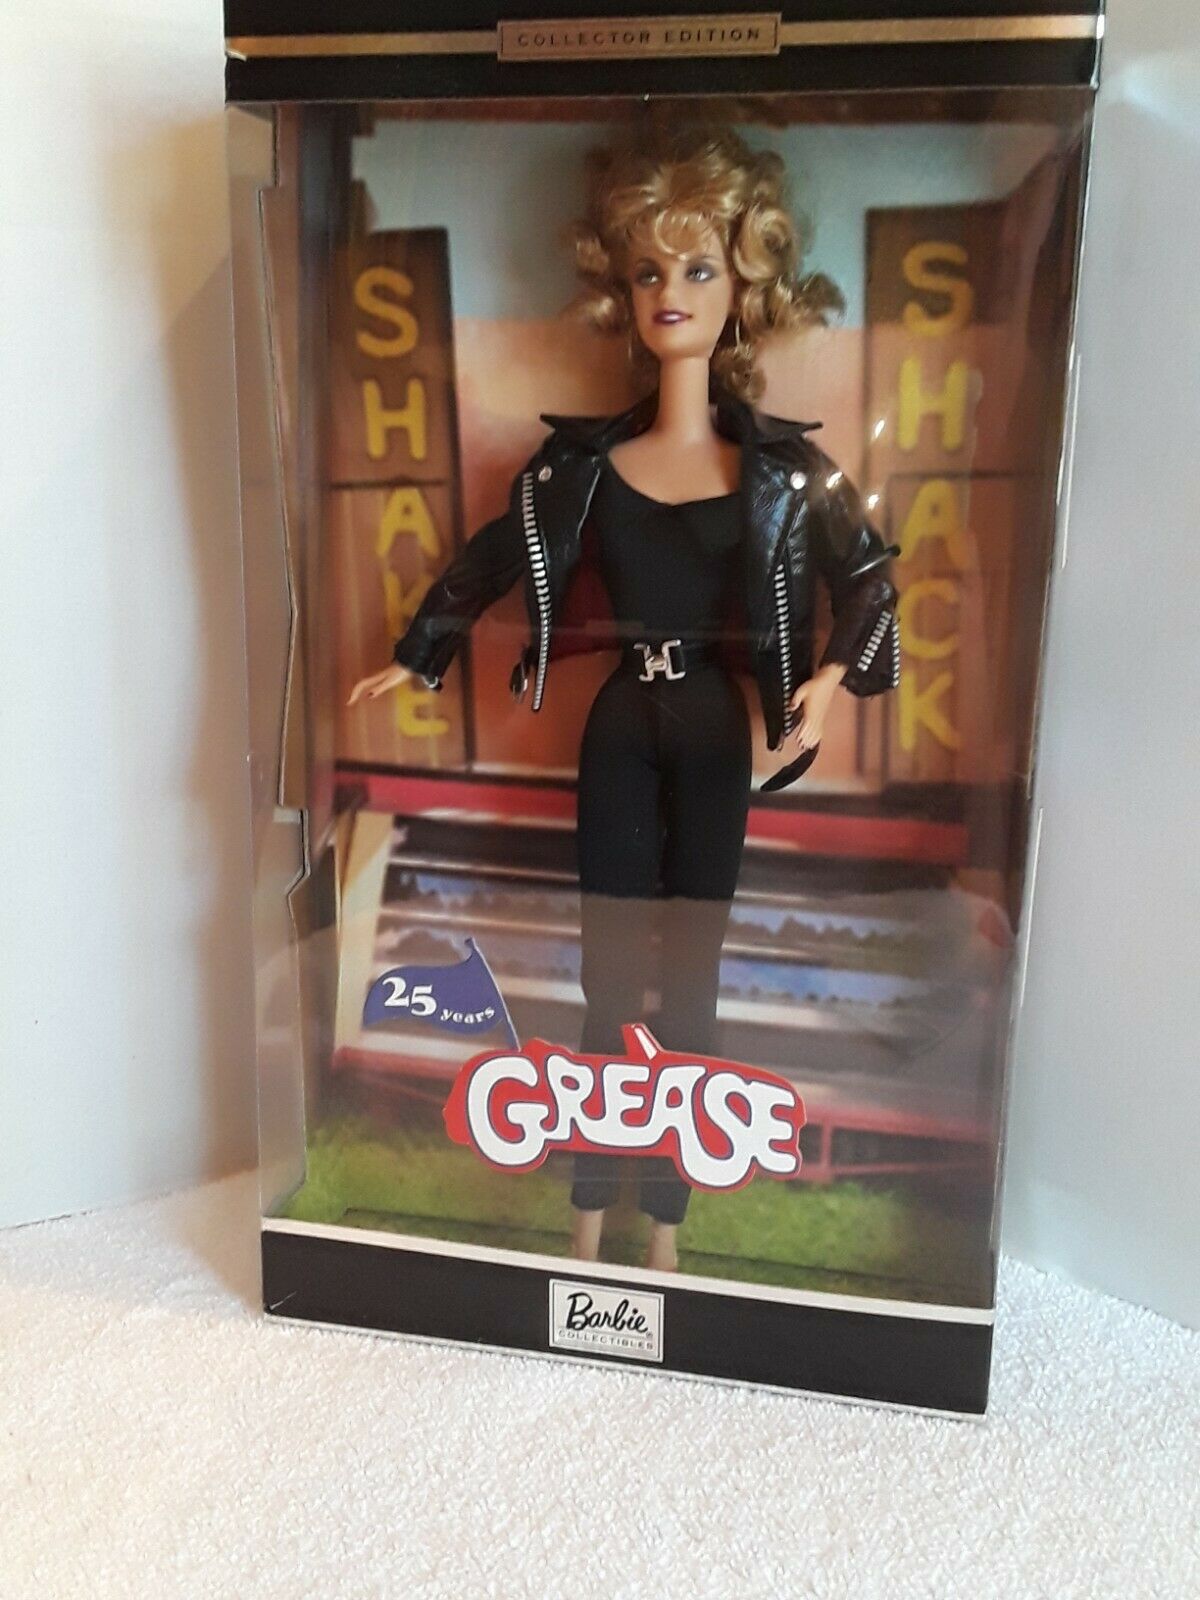 2003 Grease 25 Years Barbie Doll "sandy"  Collector Edition Black Outfit Nib